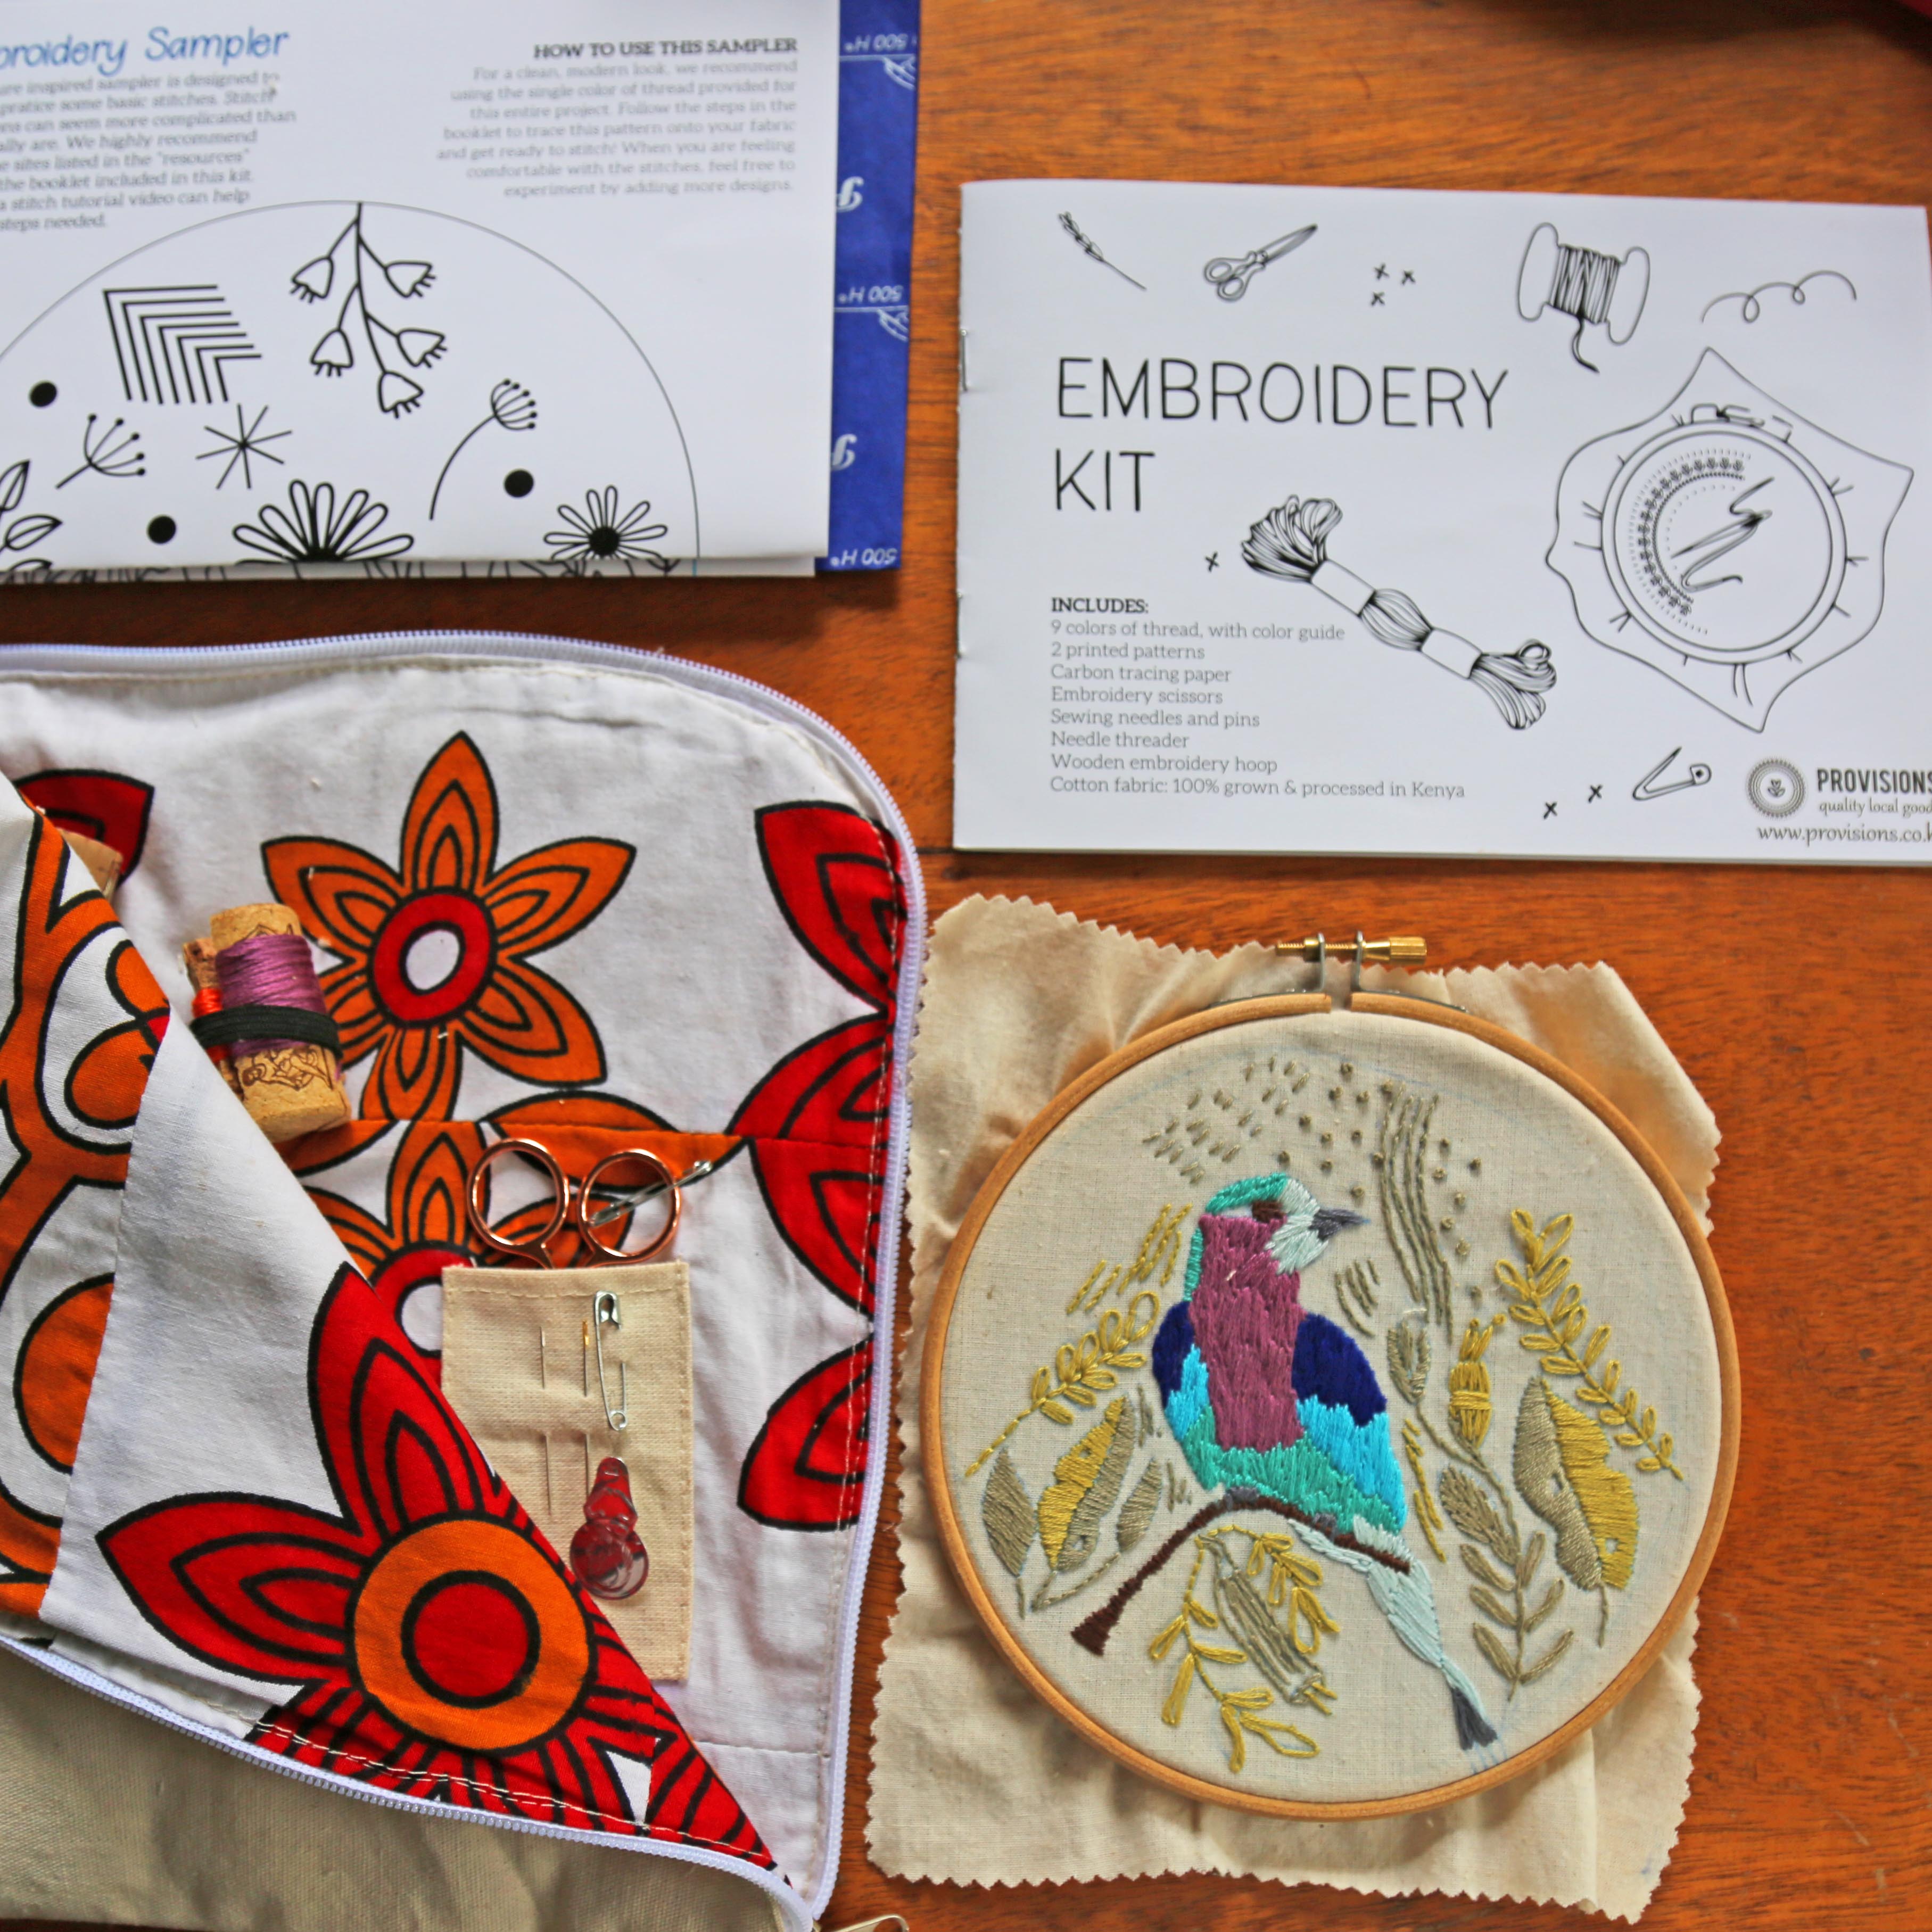 Embroidery: Digital Patterns - Provisions